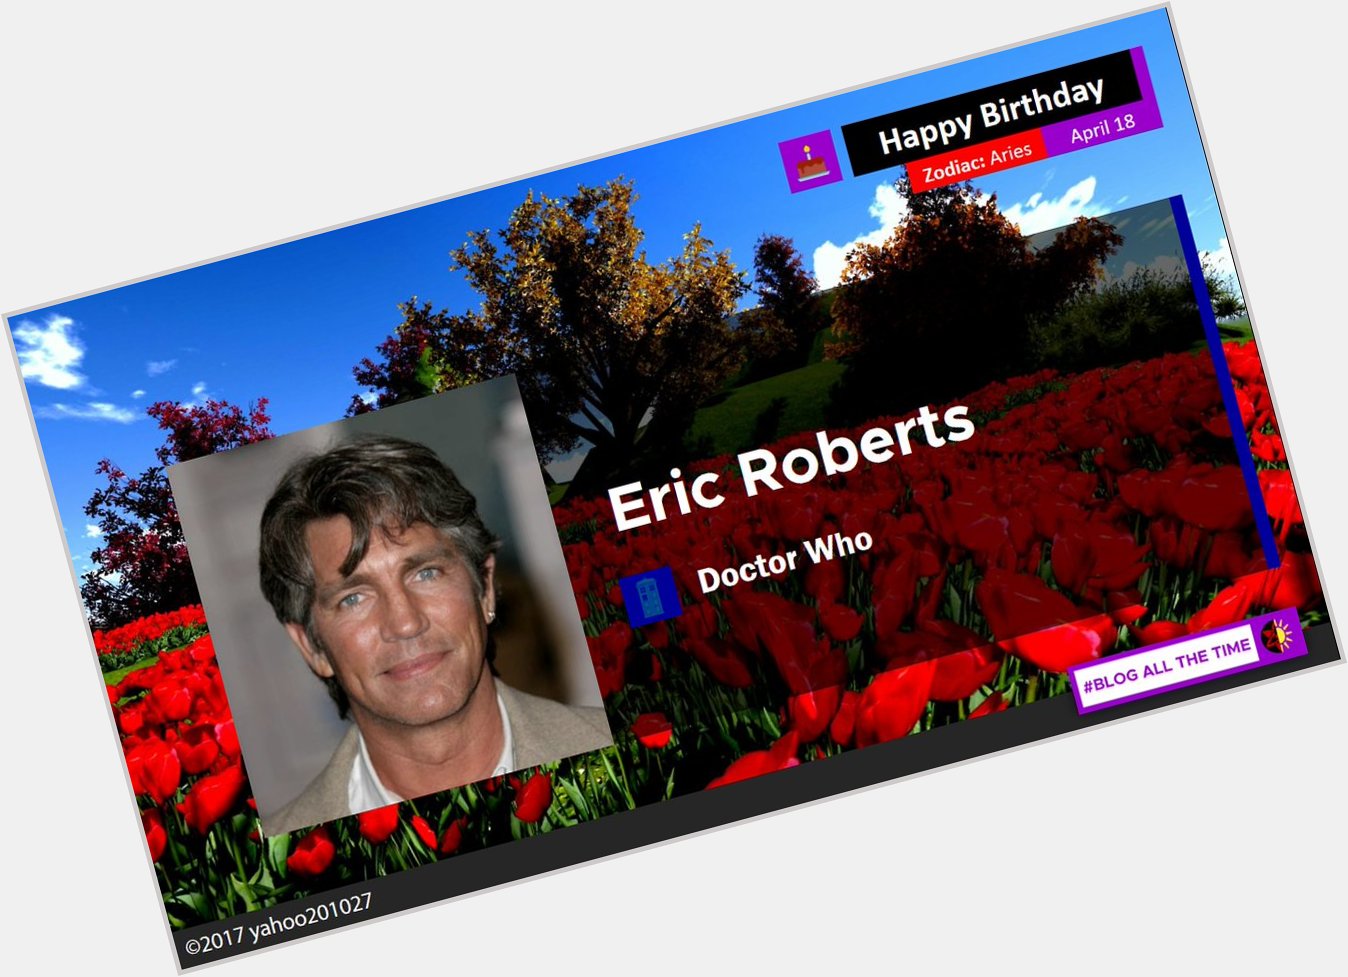 Happy Birthday to Actor Eric Roberts, who played The Master in the 1996 TV Movie.  